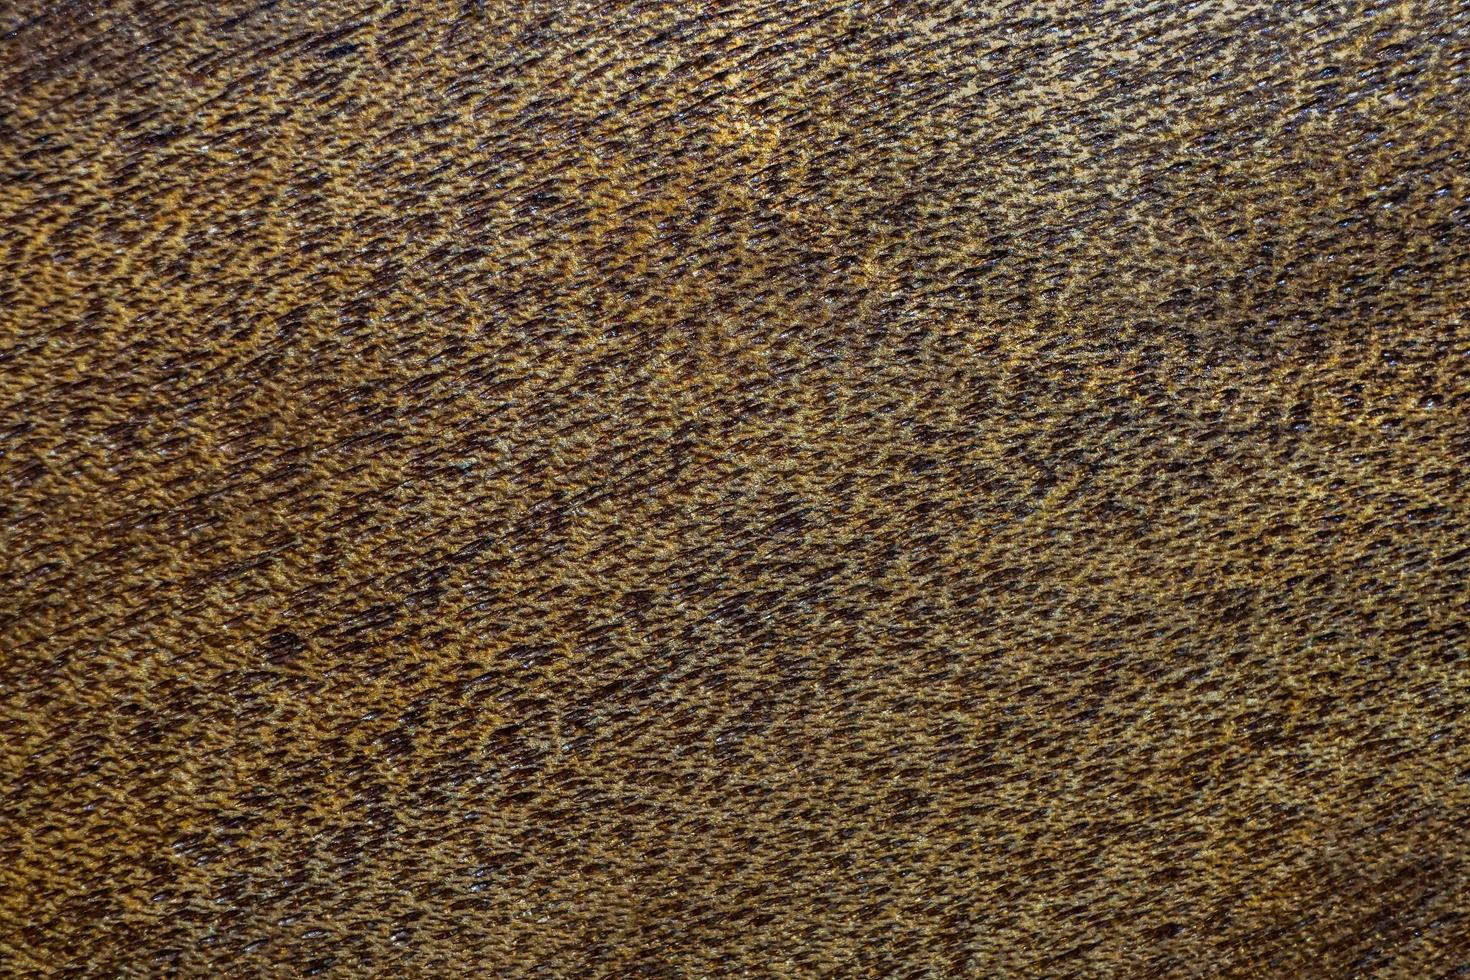 the abstract surface of the slick wood in medium light for a background pattern. a detailed element graphic for a creative design. photo